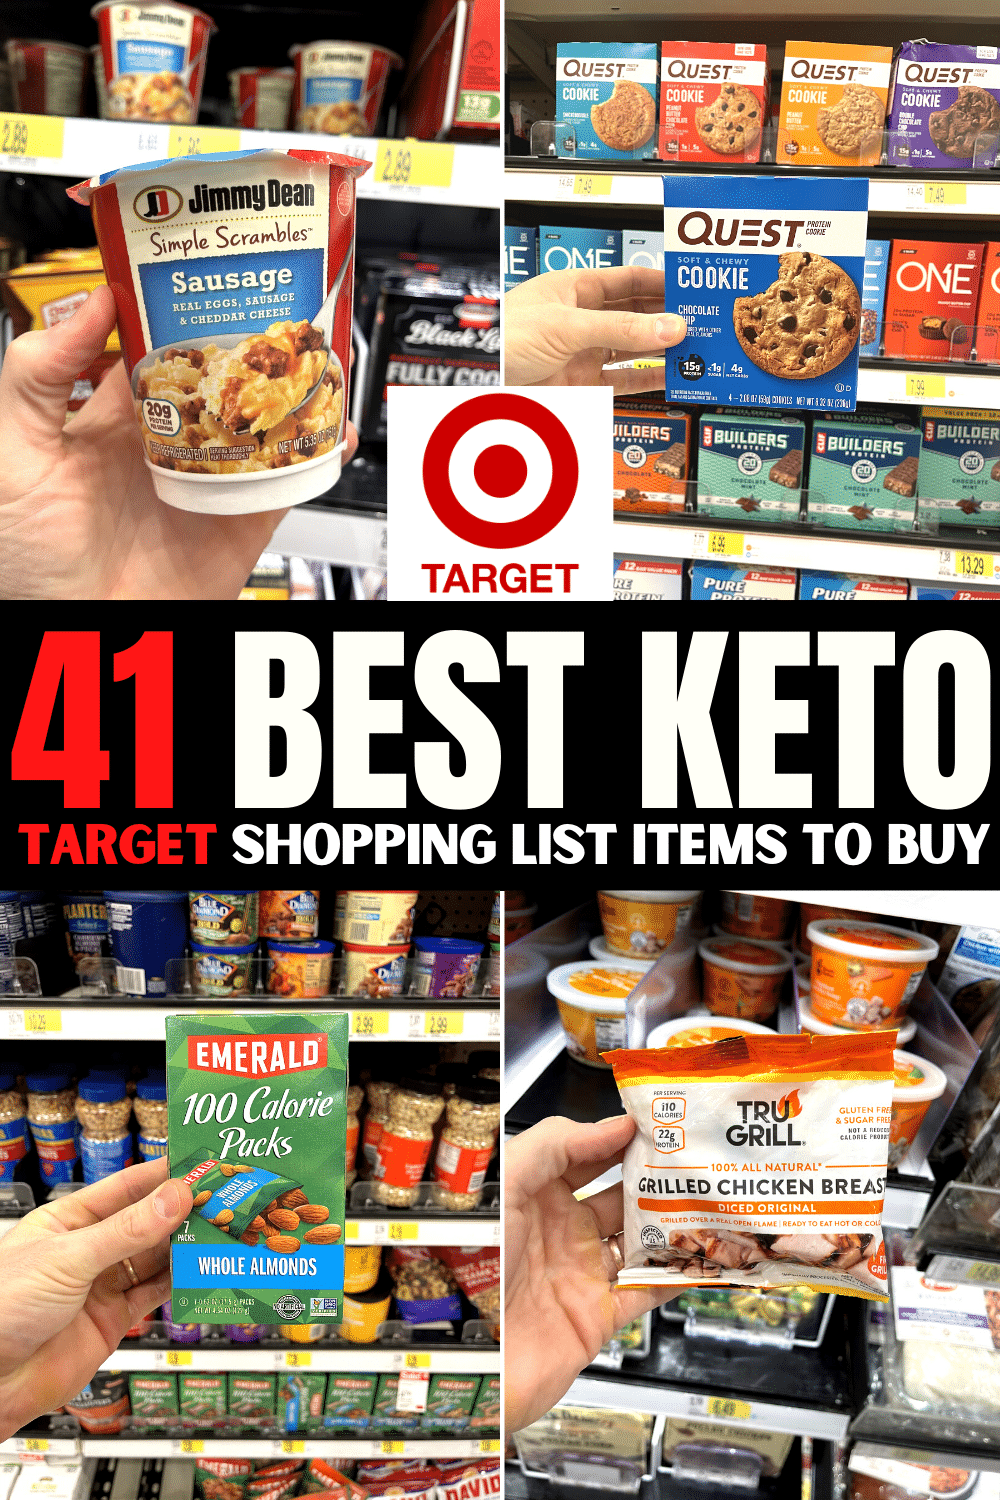 A compilation of a hand holding 4 low carb items with text above them that reads "41 best keto Target shopping list items".